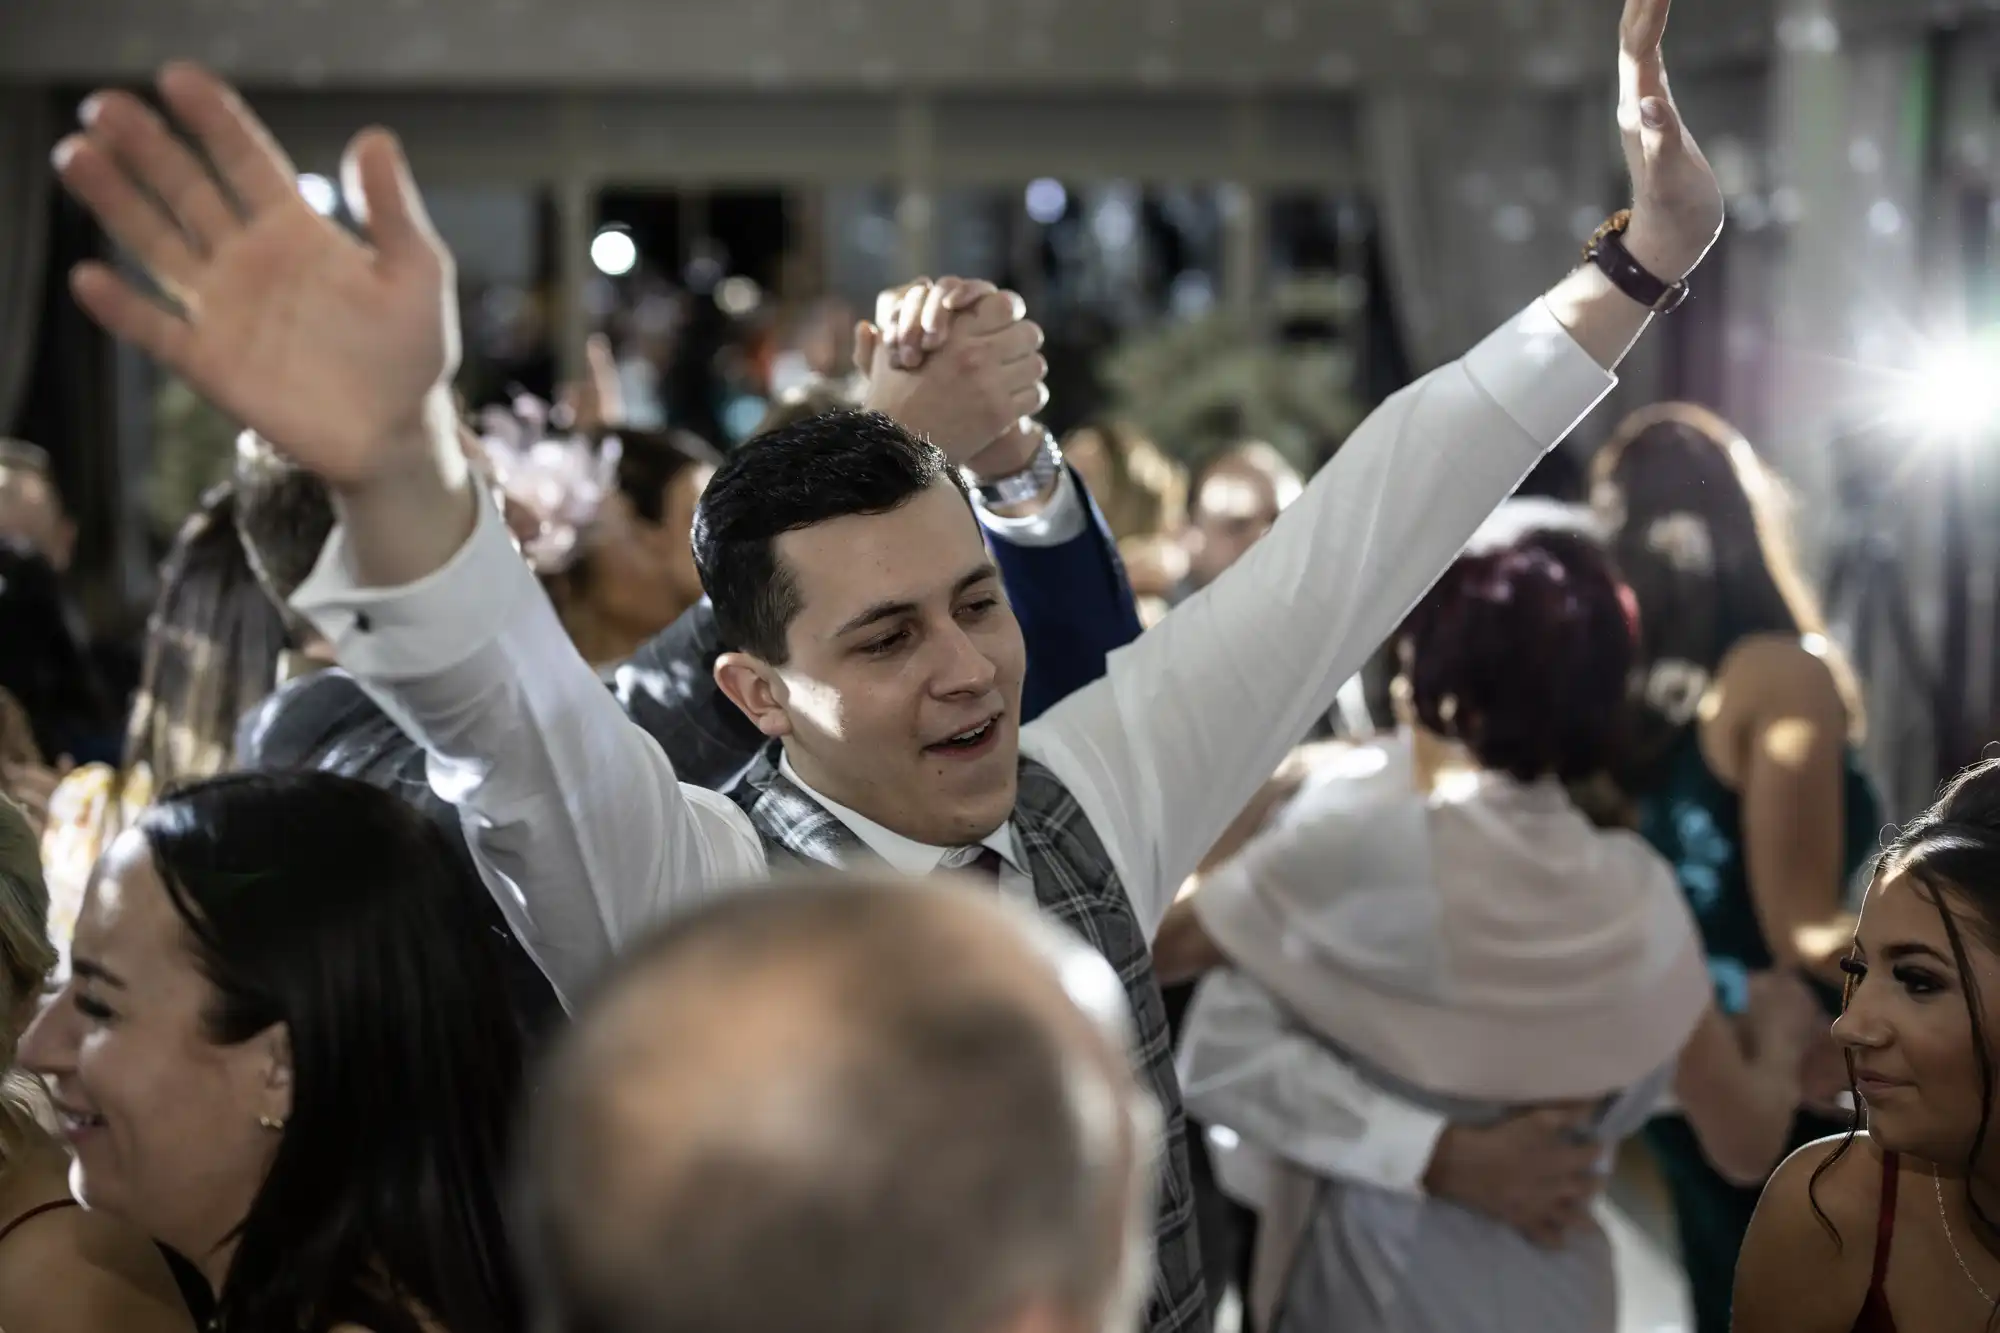 A man in formal attire dances with his arms raised, surrounded by other people at what appears to be a social event.